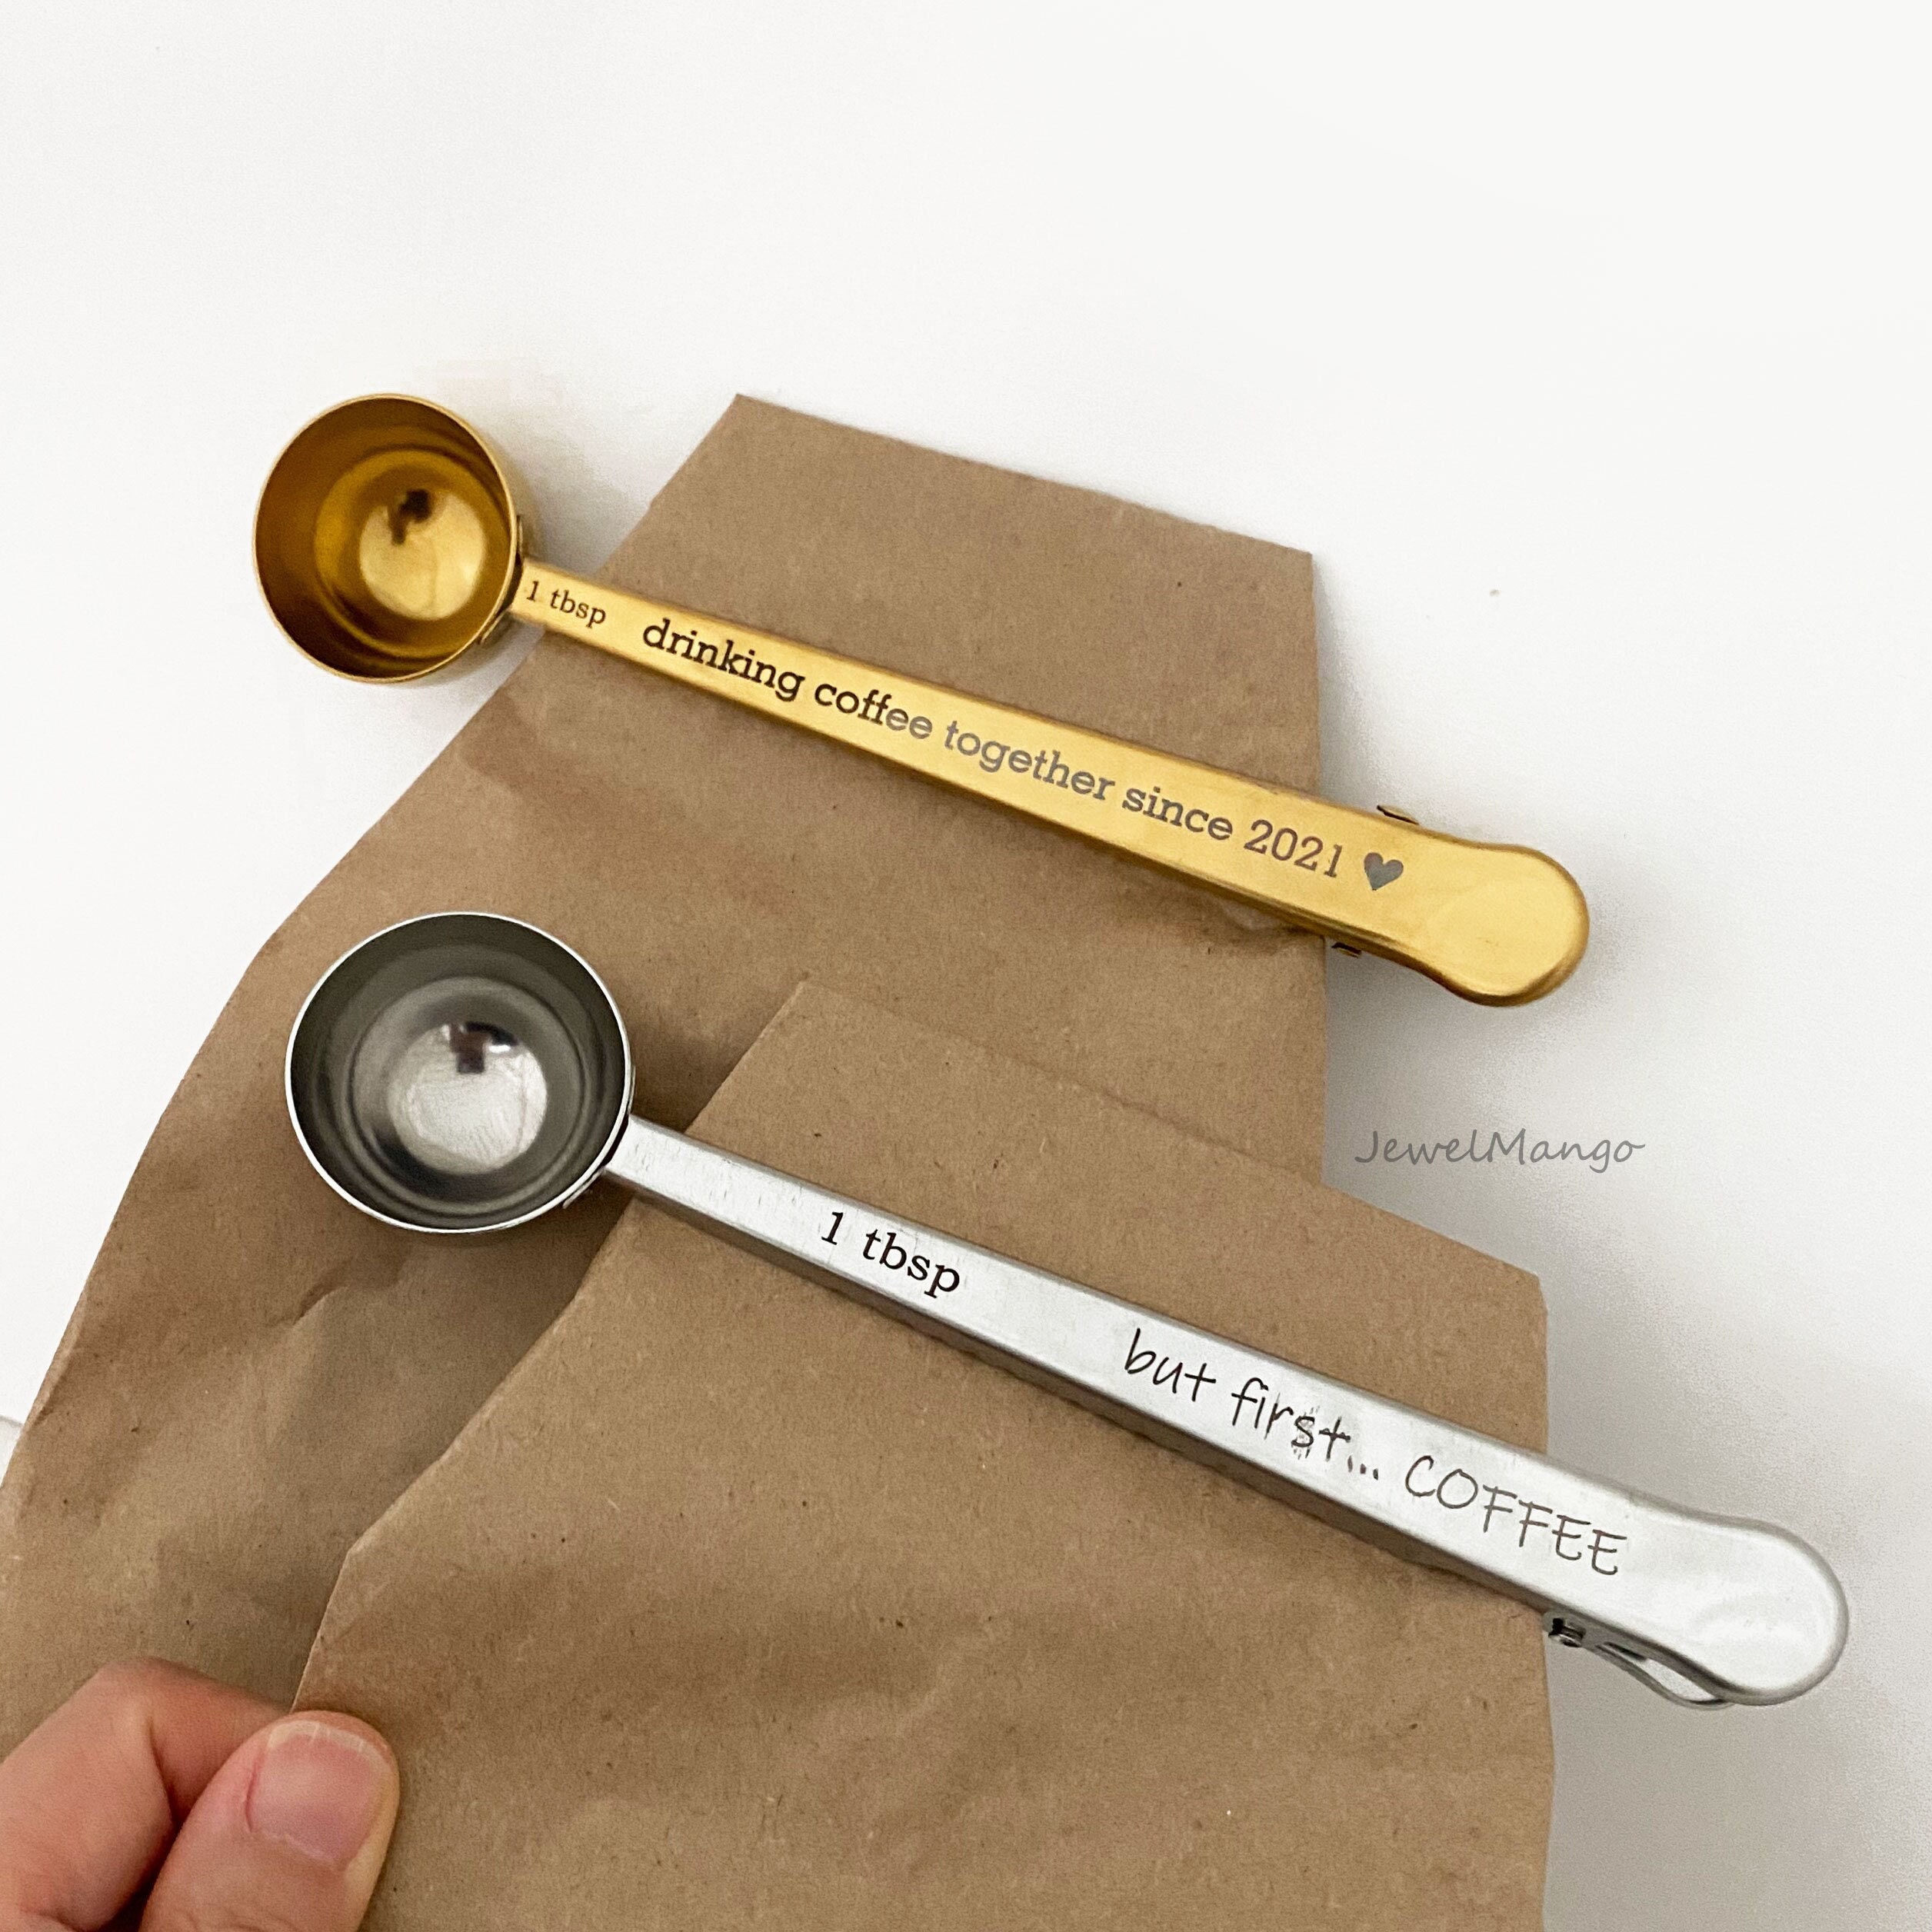 2.5 Cc 1/2 Teaspoon 2.5 Ml Long Handle Scoop for Measuring Coffee, Pet  Food, Grains, Protein, Spices and Other Dry Goods 